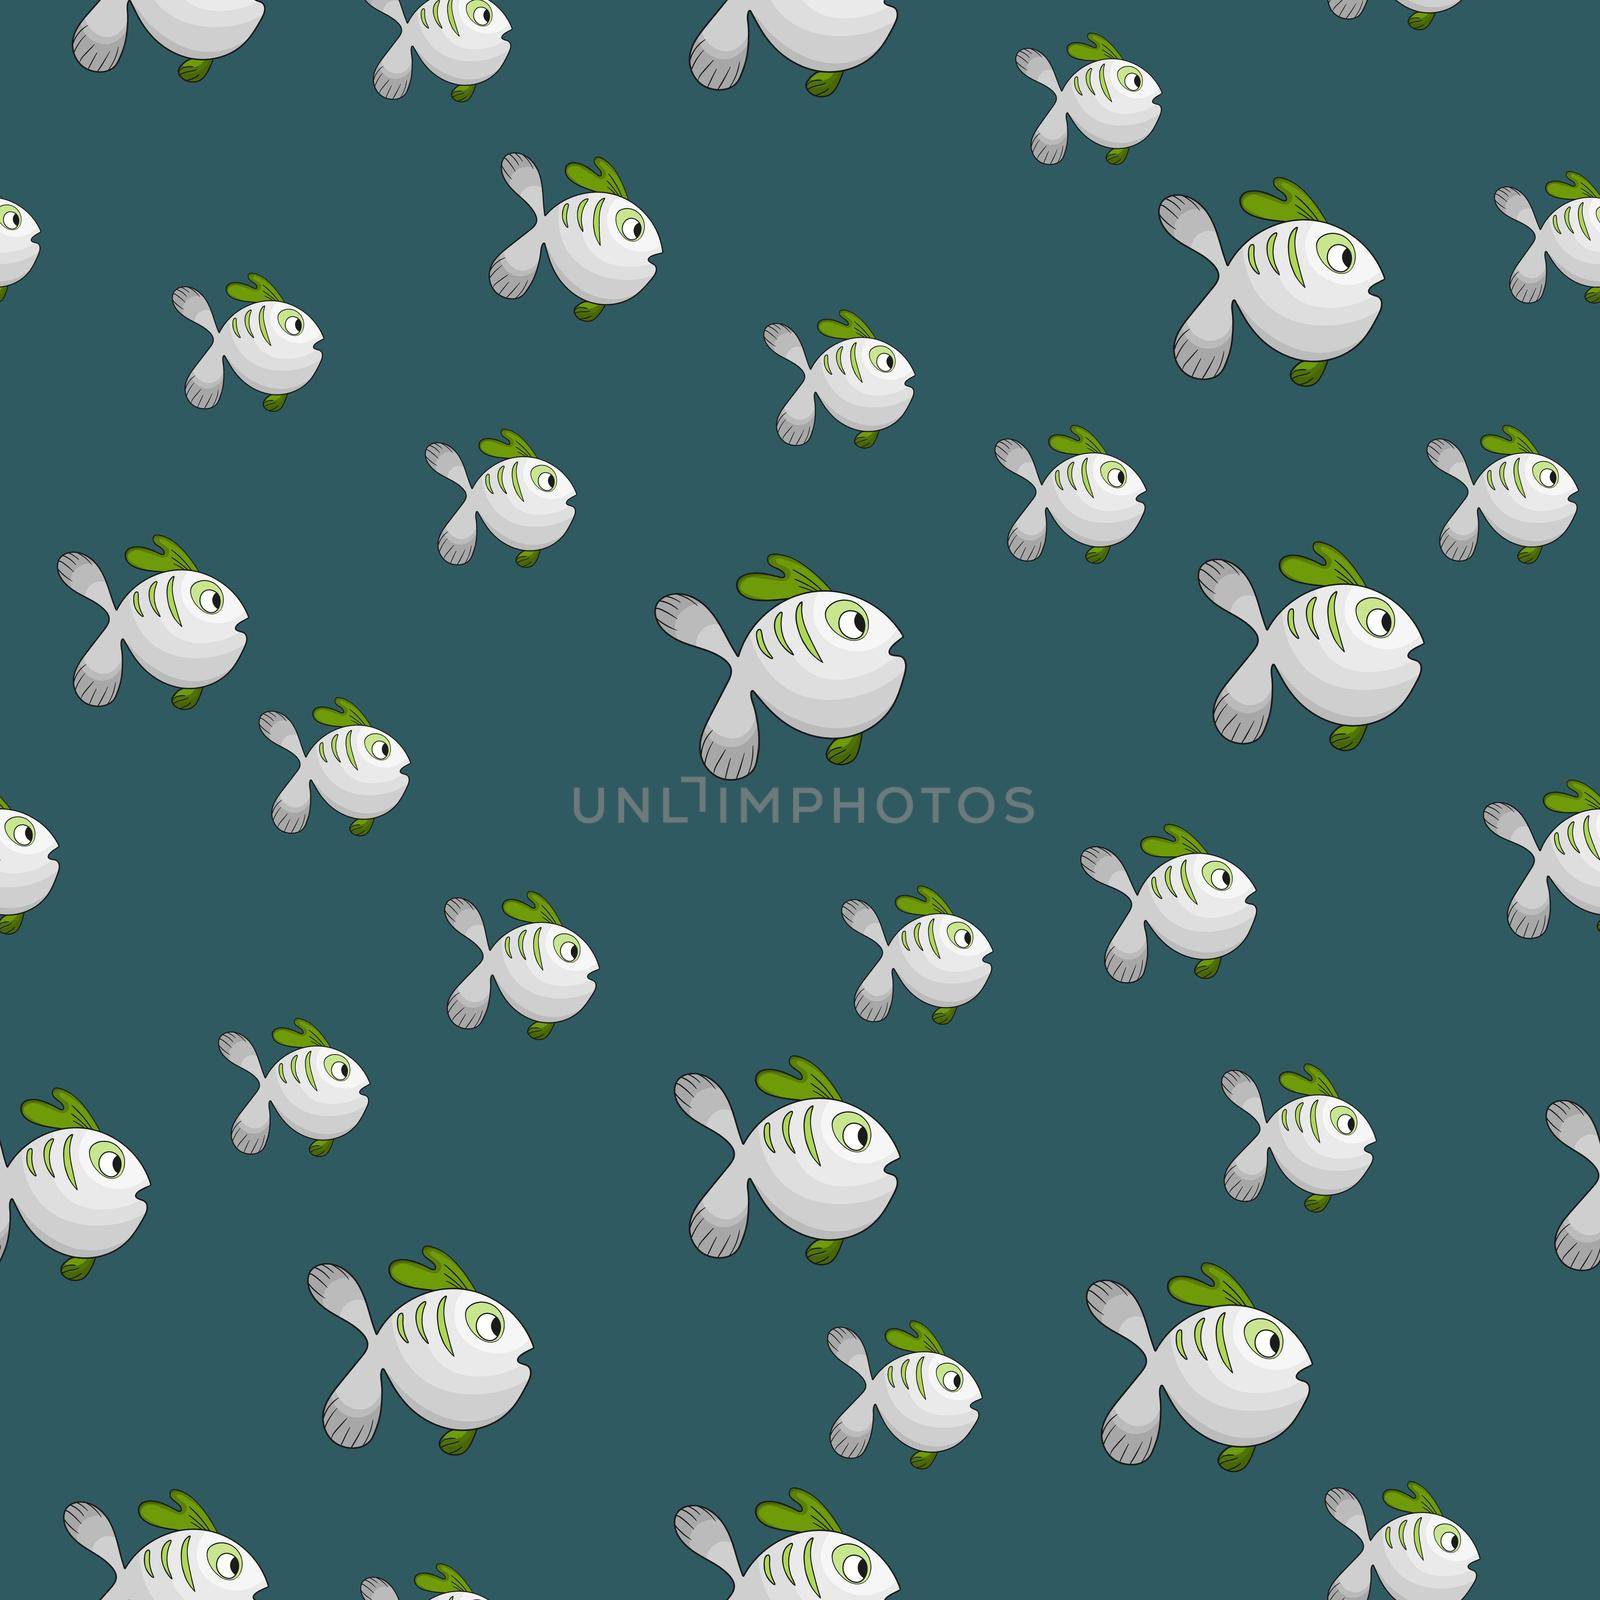 Seamless pattern with cute fish on green background. Vector cartoon animals colorful illustration. Adorable character for cards, wallpaper, textile, fabric. Flat style